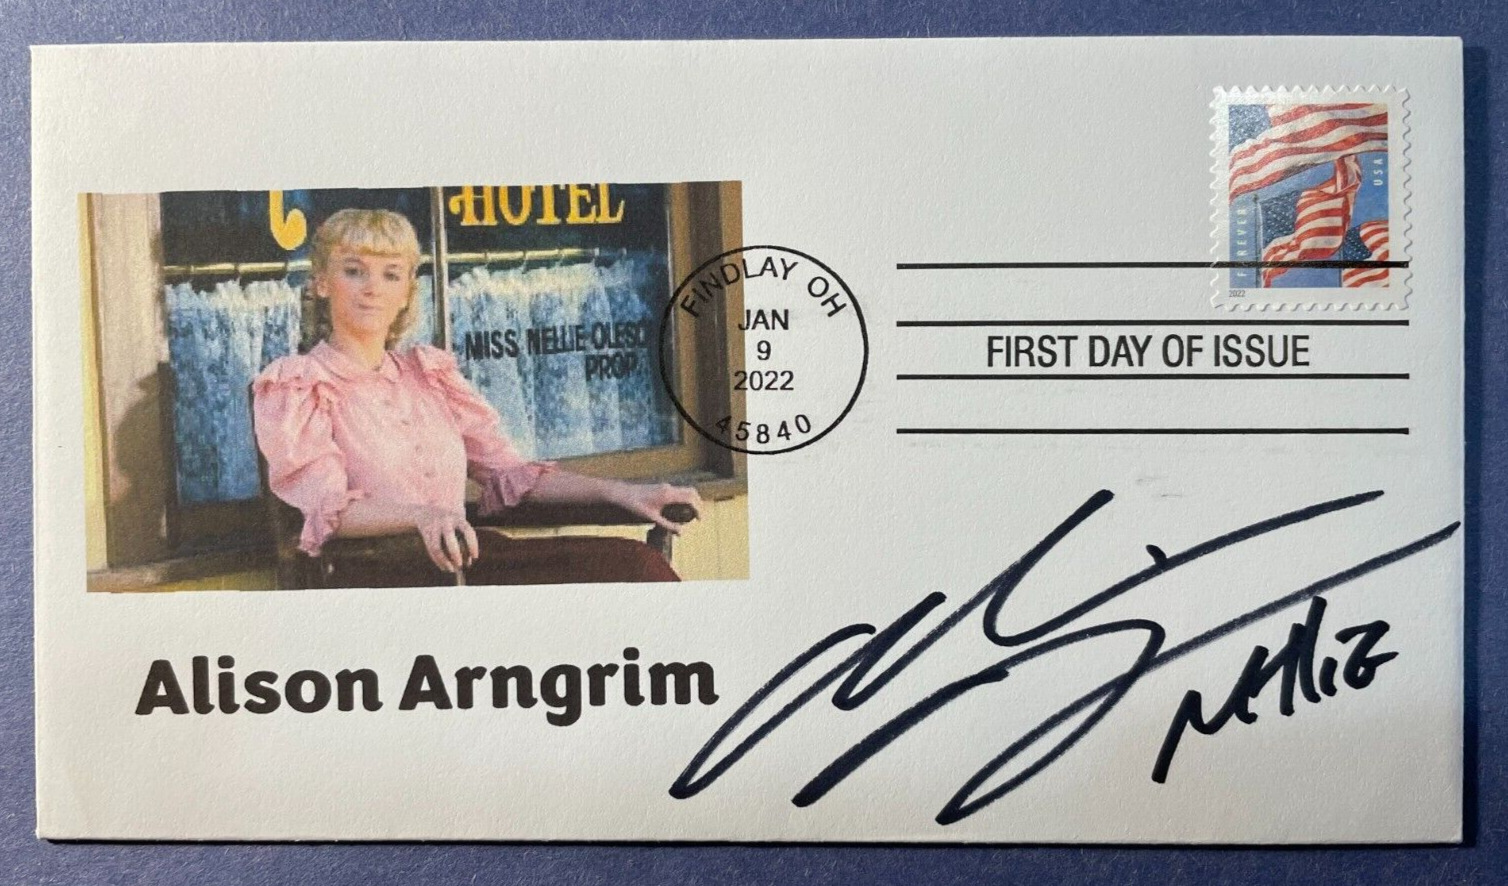 SIGNED ALISON ARNGRIM FDC AUTOGRAPH FIRST DAY COVER - LITTLE HOUSE ON THE PRAIRI